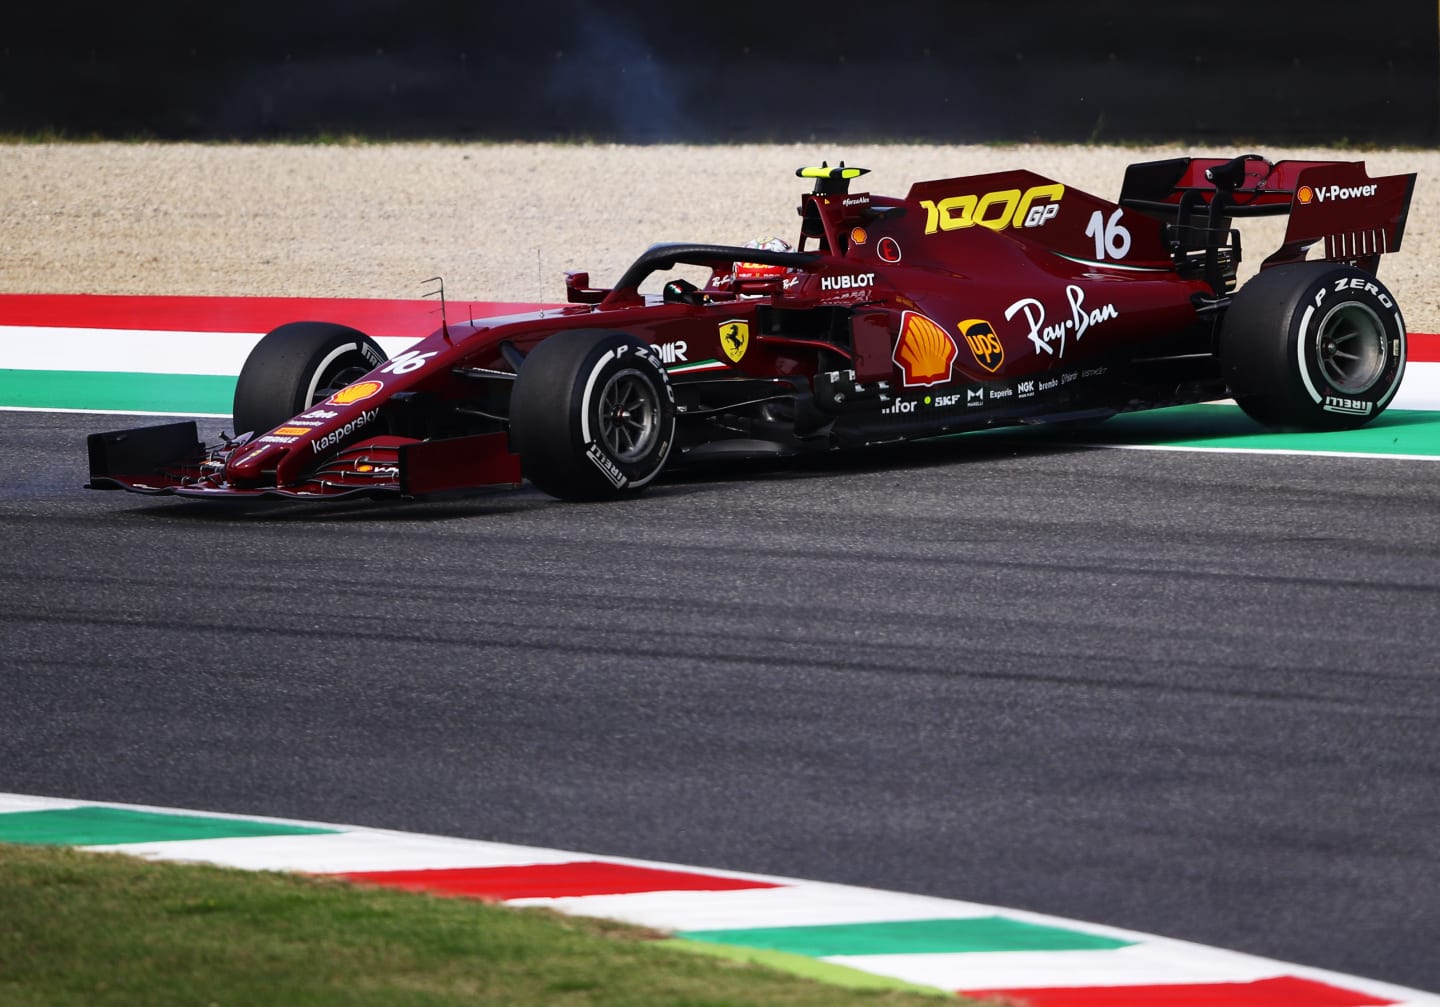 SCARPERIA, ITALY - SEPTEMBER 11: Charles Leclerc of Monaco driving the (16) Scuderia Ferrari SF1000 spins during practice ahead of the F1 Grand Prix of Tuscany at Mugello Circuit on September 11, 2020 in Scarperia, Italy. (Photo by Bryn Lennon/Getty Images)